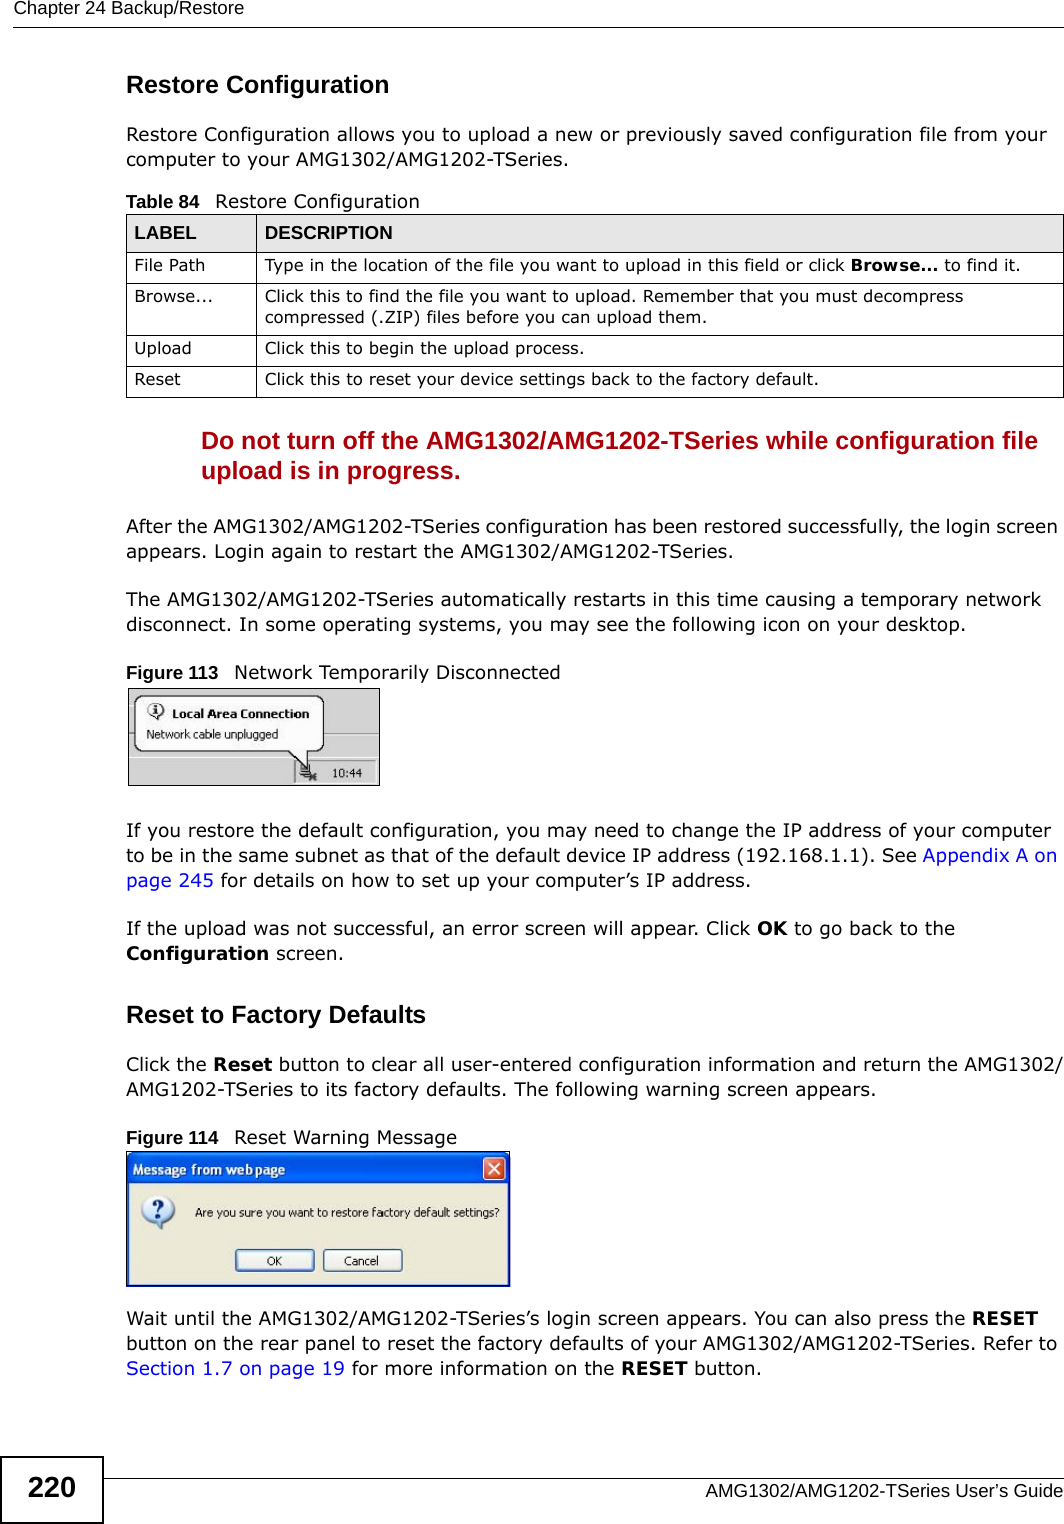 Chapter 24 Backup/RestoreAMG1302/AMG1202-TSeries User’s Guide220Restore Configuration Restore Configuration allows you to upload a new or previously saved configuration file from your computer to your AMG1302/AMG1202-TSeries.Do not turn off the AMG1302/AMG1202-TSeries while configuration file upload is in progress.After the AMG1302/AMG1202-TSeries configuration has been restored successfully, the login screen appears. Login again to restart the AMG1302/AMG1202-TSeries. The AMG1302/AMG1202-TSeries automatically restarts in this time causing a temporary network disconnect. In some operating systems, you may see the following icon on your desktop.Figure 113   Network Temporarily DisconnectedIf you restore the default configuration, you may need to change the IP address of your computer to be in the same subnet as that of the default device IP address (192.168.1.1). See Appendix A on page 245 for details on how to set up your computer’s IP address.If the upload was not successful, an error screen will appear. Click OK to go back to the Configuration screen. Reset to Factory Defaults  Click the Reset button to clear all user-entered configuration information and return the AMG1302/AMG1202-TSeries to its factory defaults. The following warning screen appears.Figure 114   Reset Warning MessageWait until the AMG1302/AMG1202-TSeries’s login screen appears. You can also press the RESET button on the rear panel to reset the factory defaults of your AMG1302/AMG1202-TSeries. Refer to Section 1.7 on page 19 for more information on the RESET button.Table 84   Restore ConfigurationLABEL DESCRIPTIONFile Path  Type in the location of the file you want to upload in this field or click Browse... to find it.Browse...  Click this to find the file you want to upload. Remember that you must decompress compressed (.ZIP) files before you can upload them. Upload  Click this to begin the upload process.Reset Click this to reset your device settings back to the factory default.